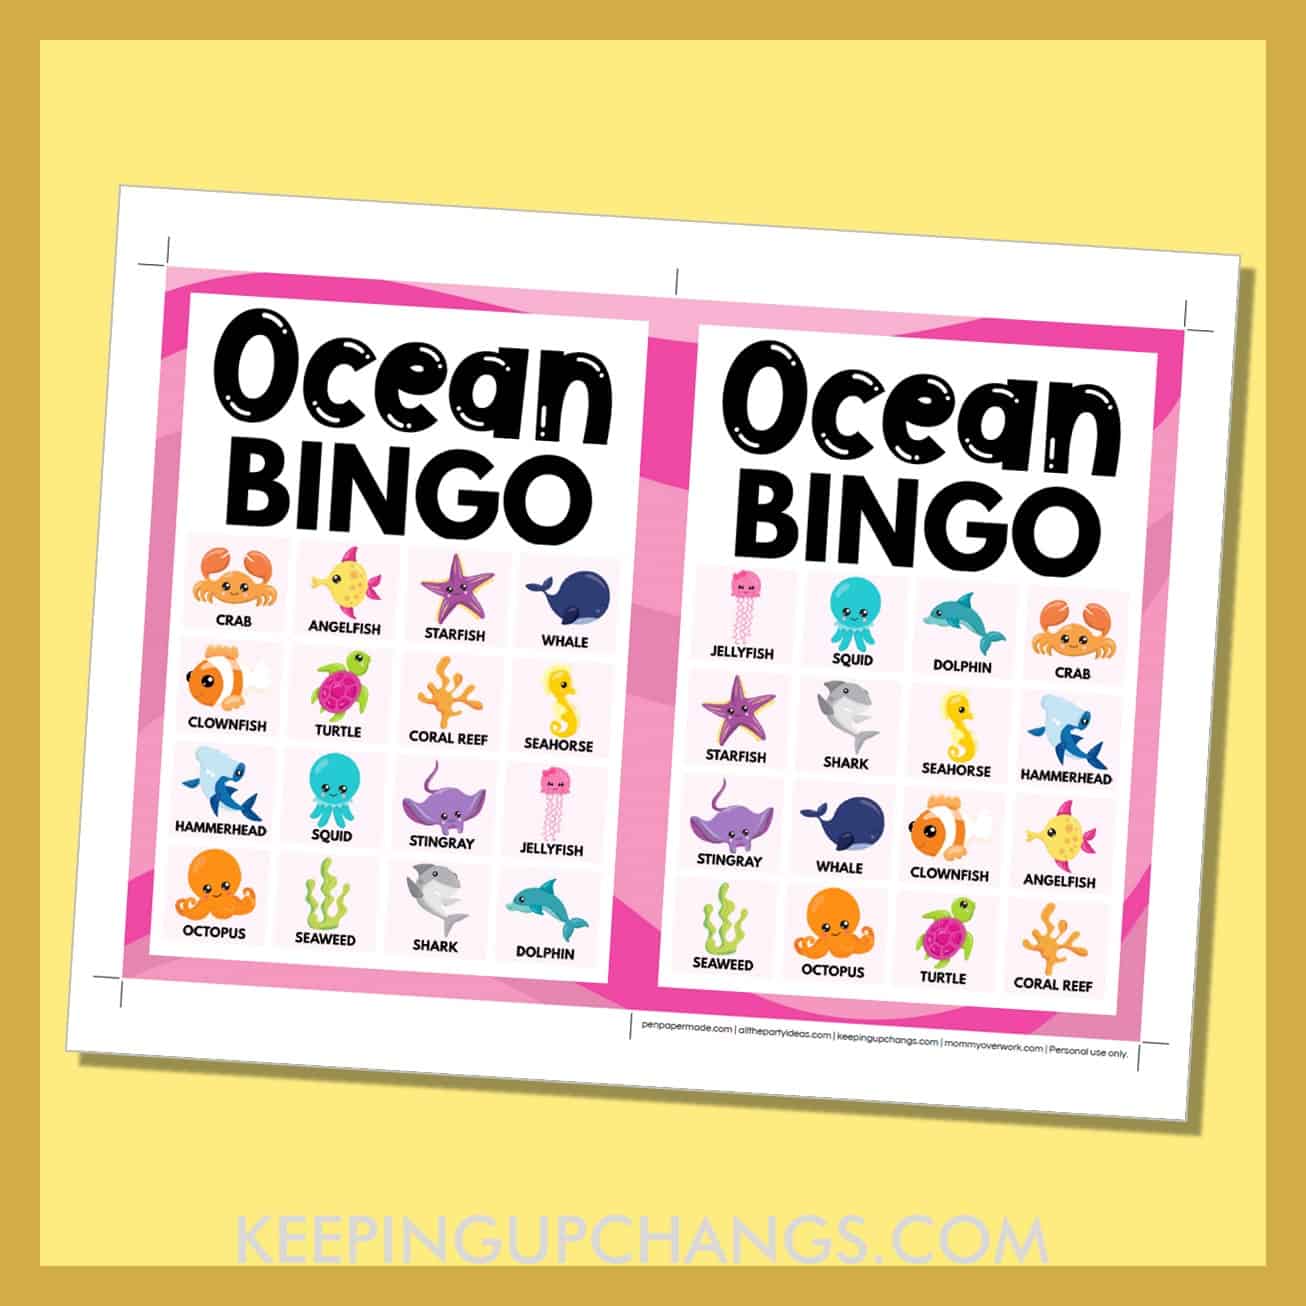 free ocean sea bingo card 4x4 5x7 game boards with images and text words.